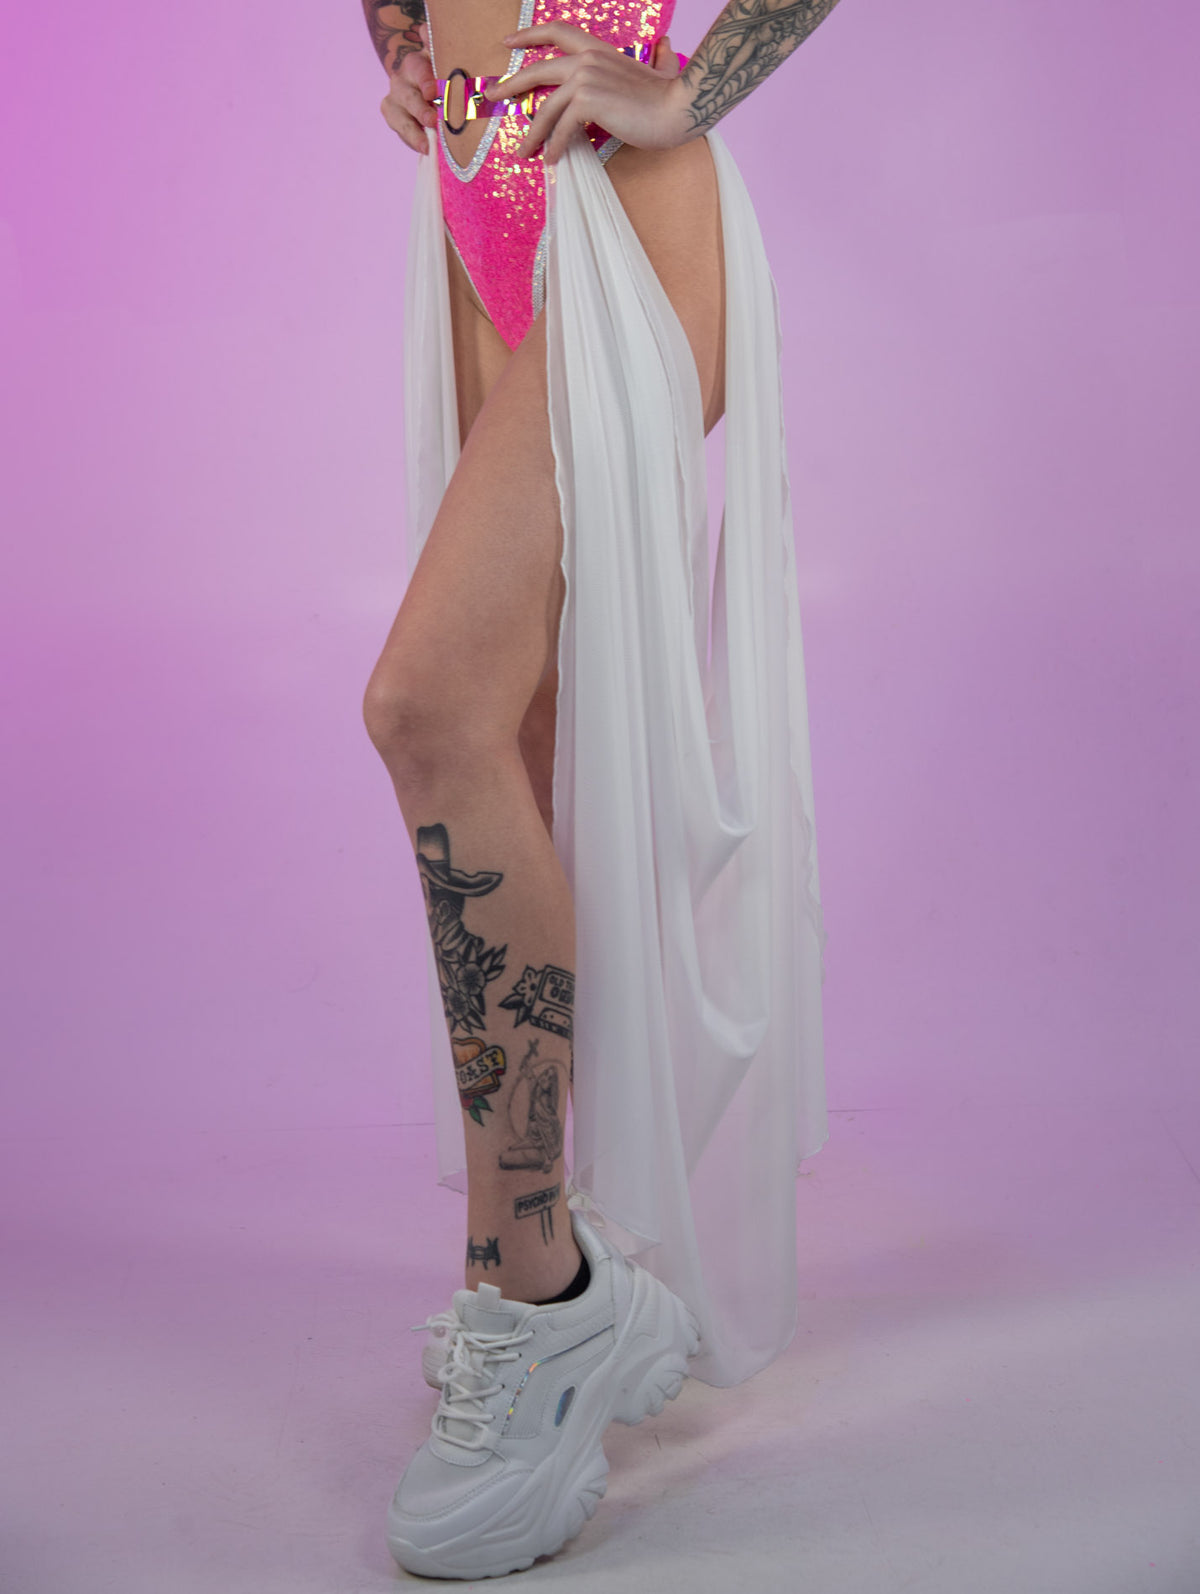 Diamond Rodeo Sheer Mesh Skirt w/ Attached Holographic Belt